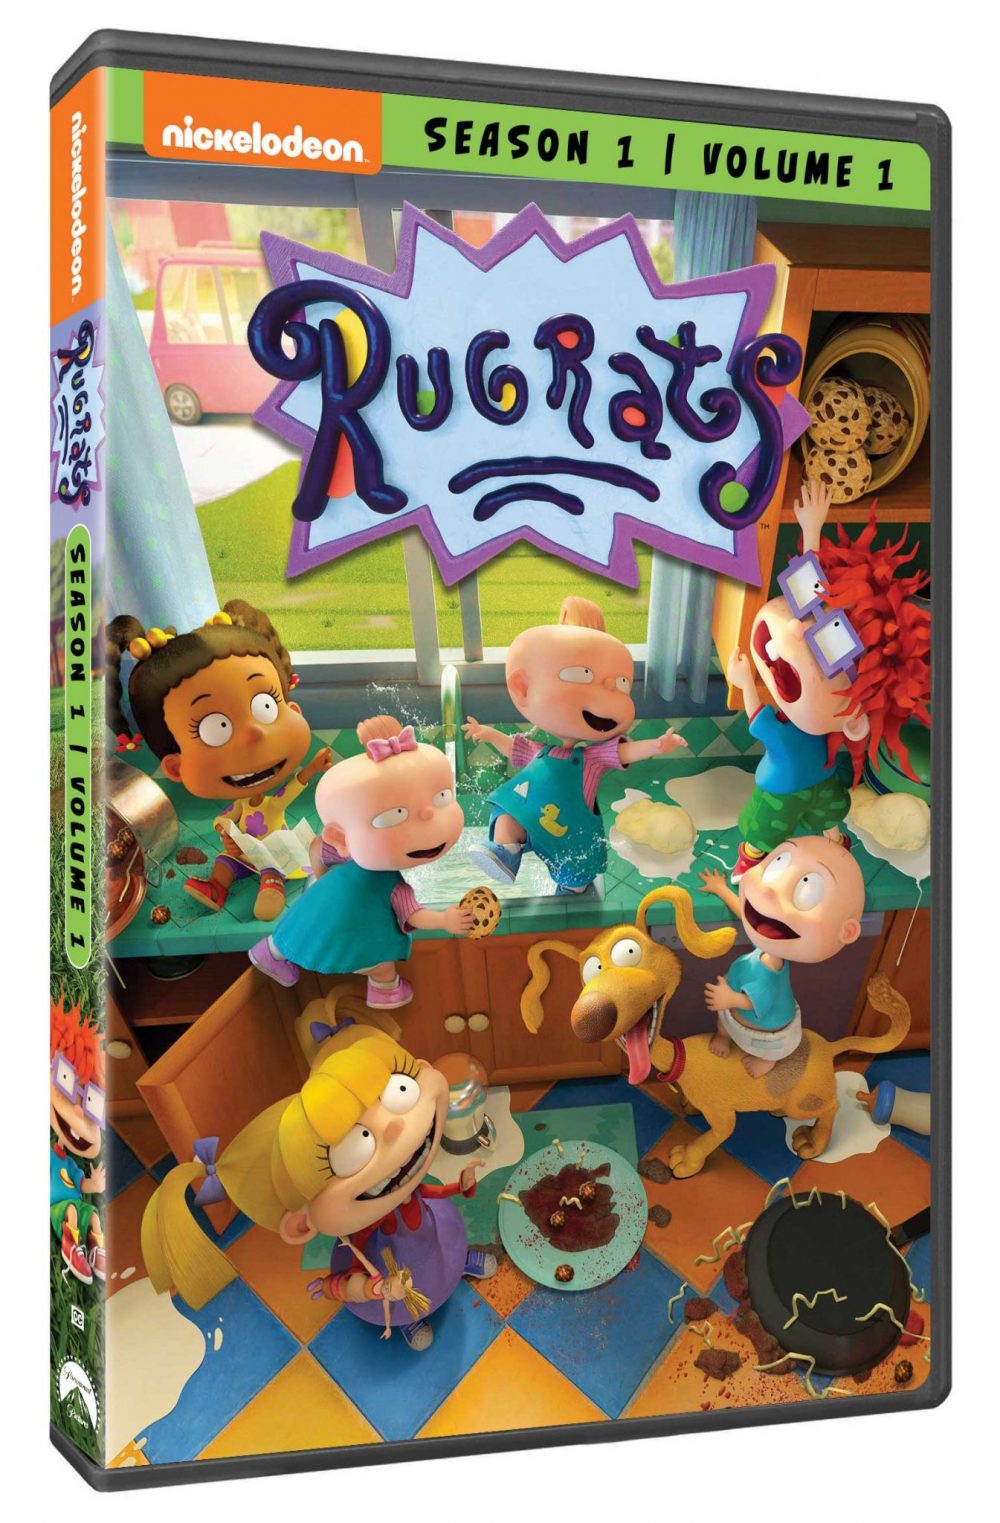 The Rugrats: Season 1 Vol 1 available on DVD!